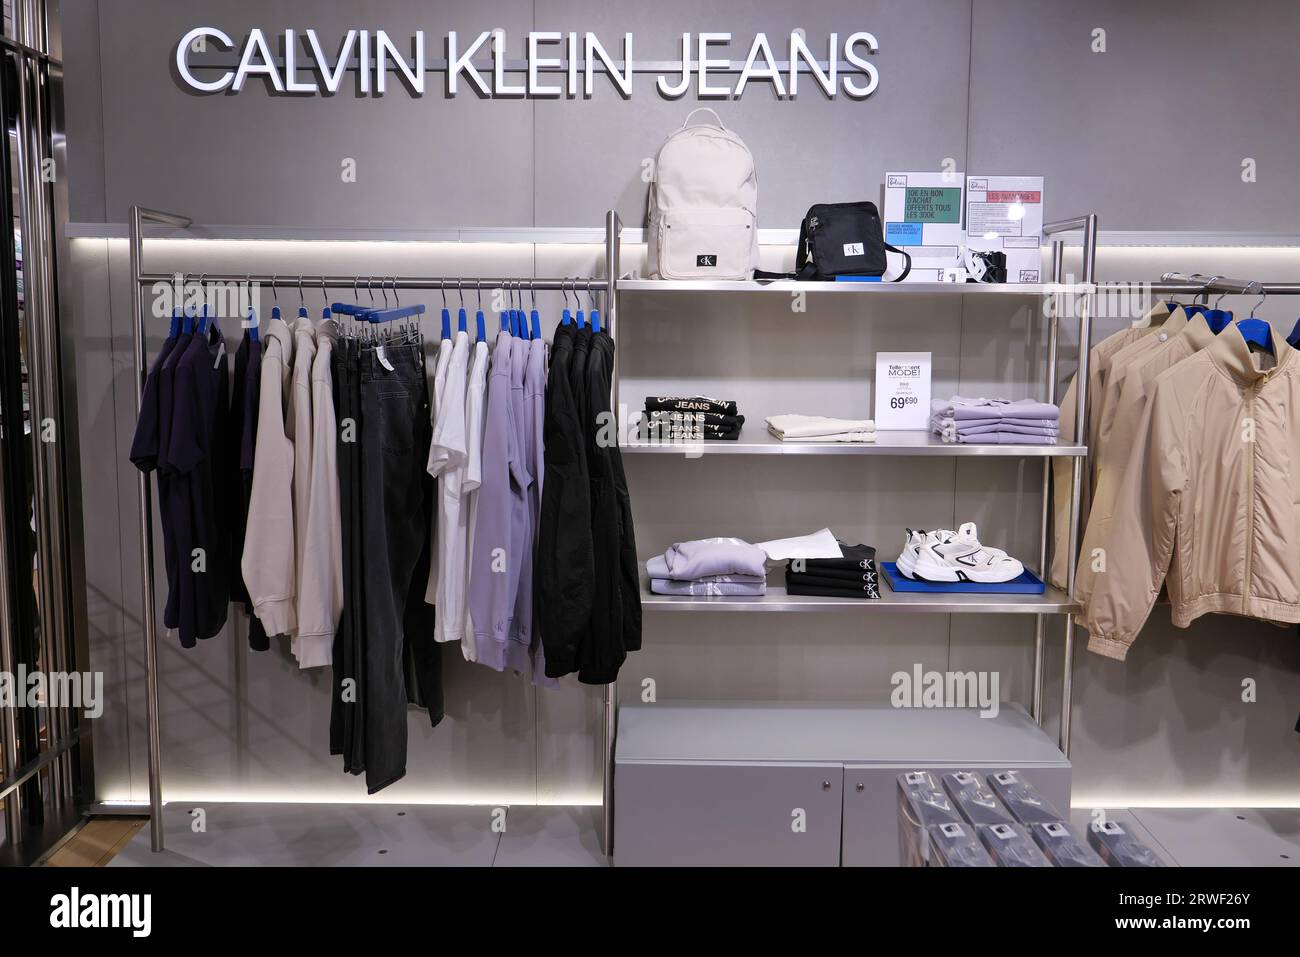 CALVIN KLEIN JEANS CLOTHING ON DISPLAY INSIDE THE FASHION STORE